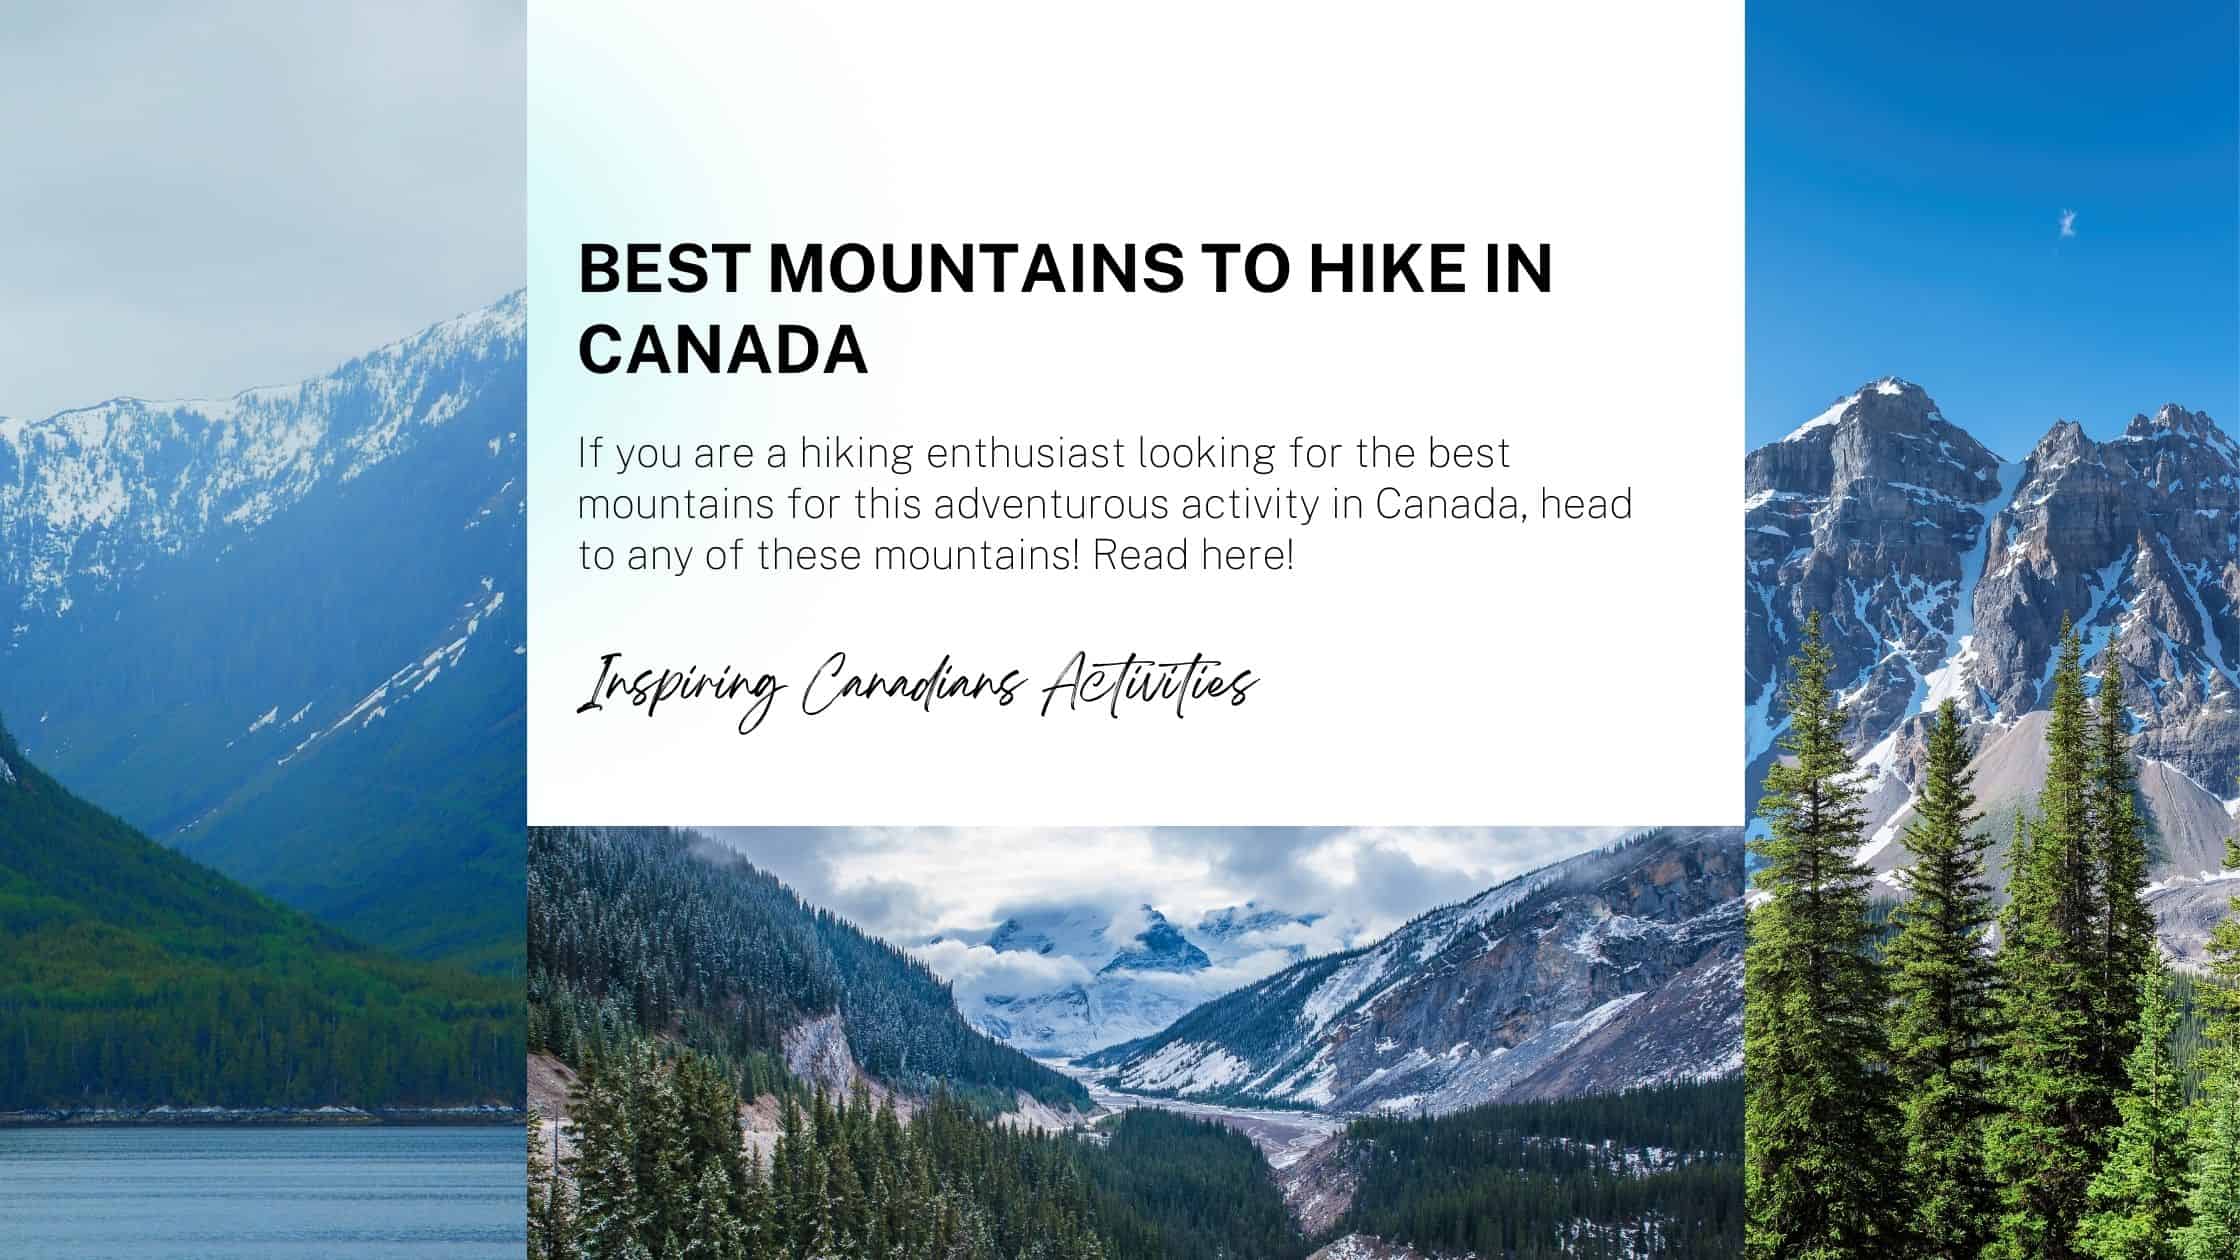 Best mountains to hike in Canada